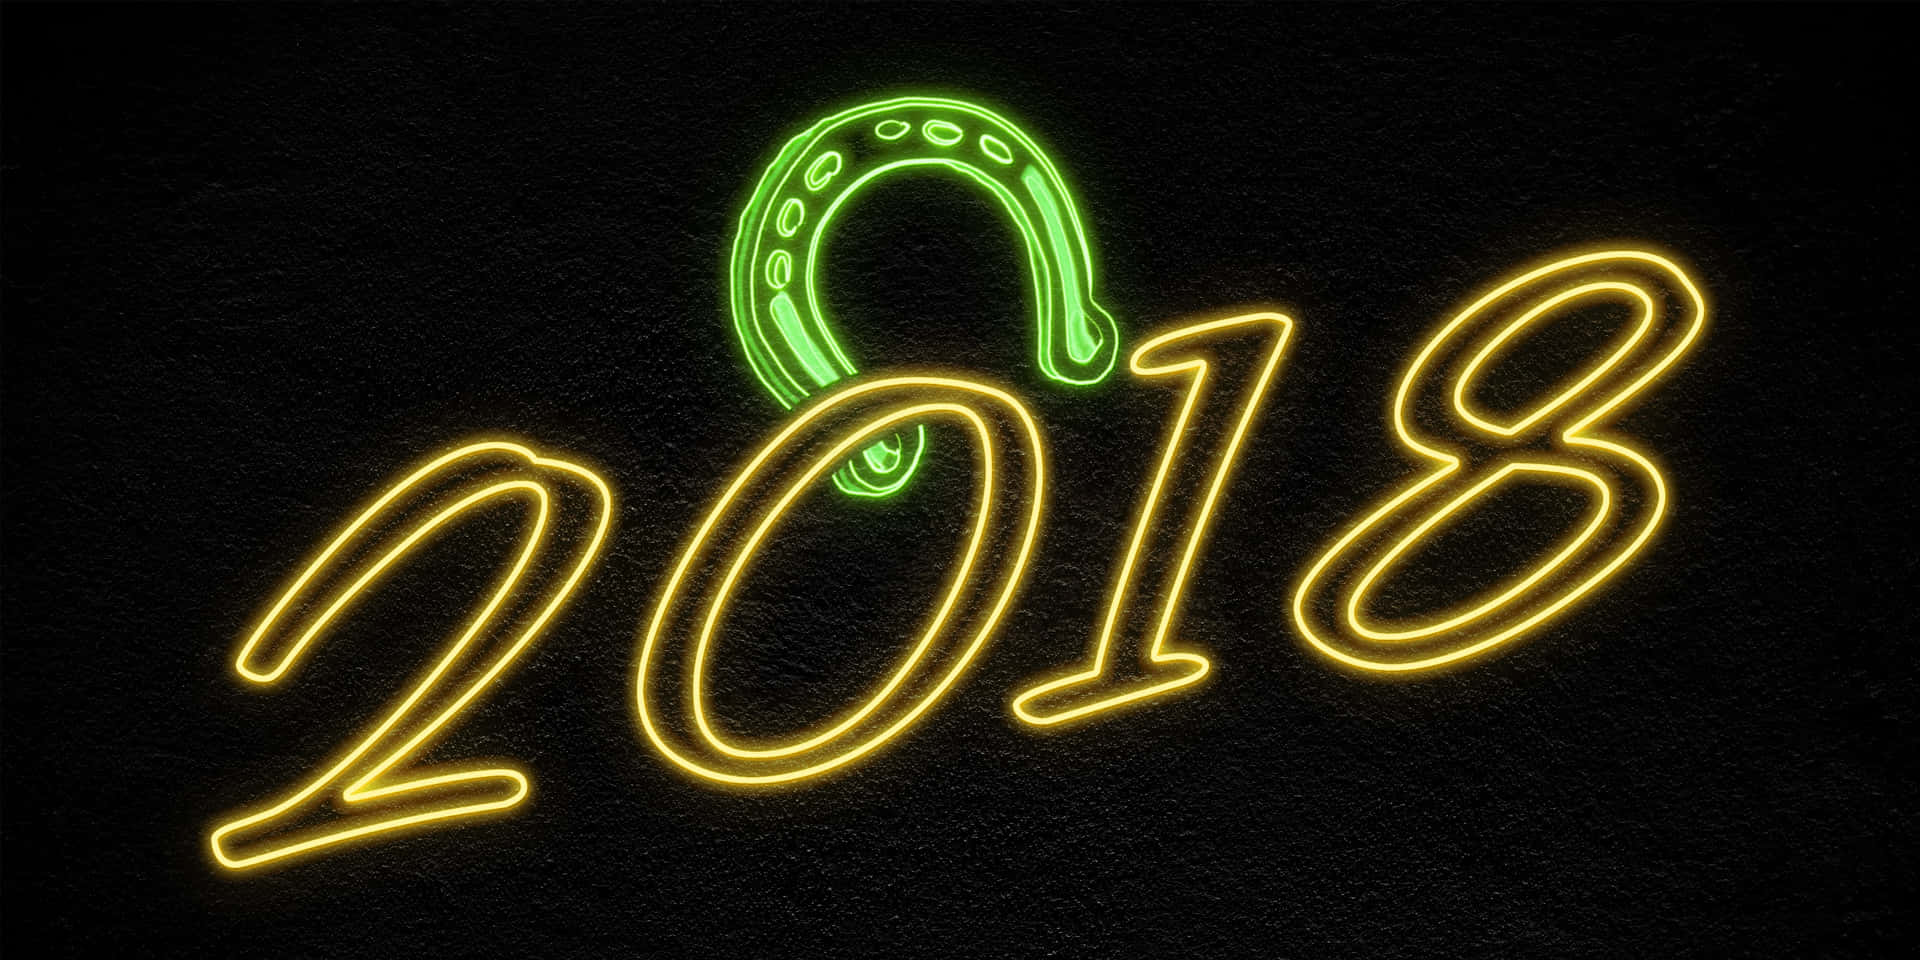 Neon Sign With The Word 2018 On It